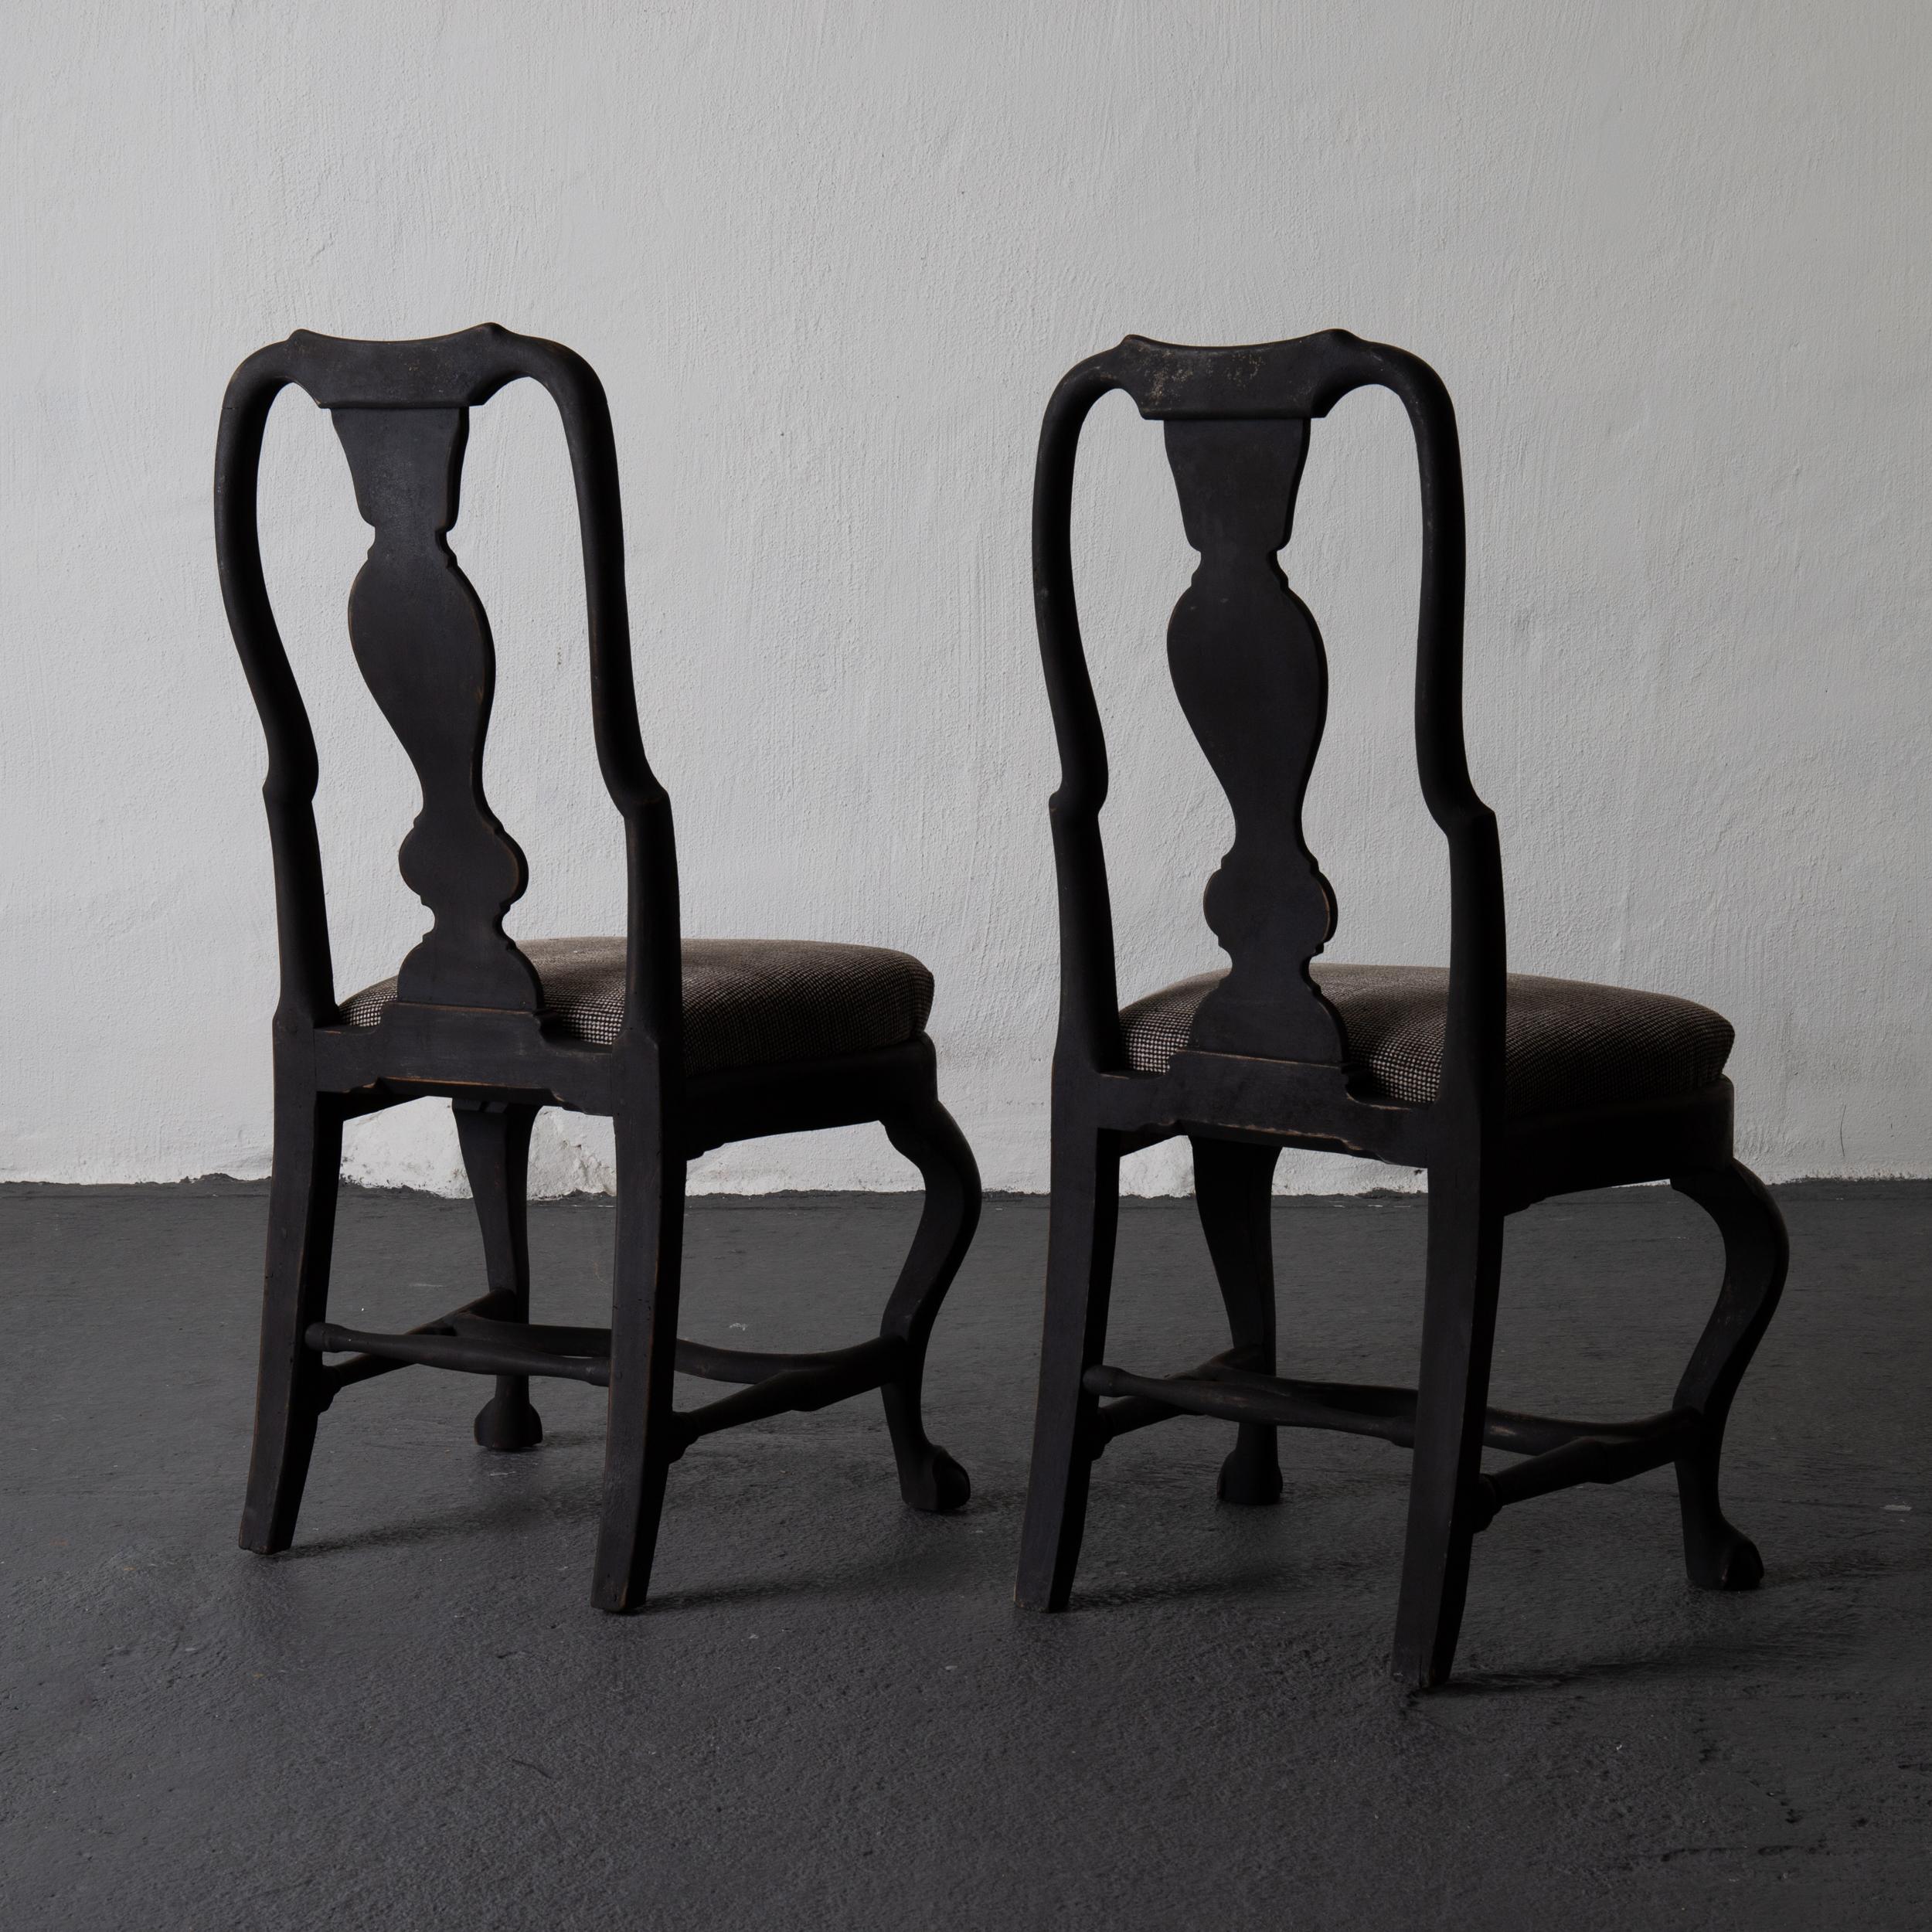 Chairs pair Swedish black Rococo, 18th century, Sweden. A pair of side chairs made during the Rococo period in Sweden 1750-1775. Curved back with an urn shaped black splat and legs ending with claw and ball feet. Finished in our Laserow black. 

